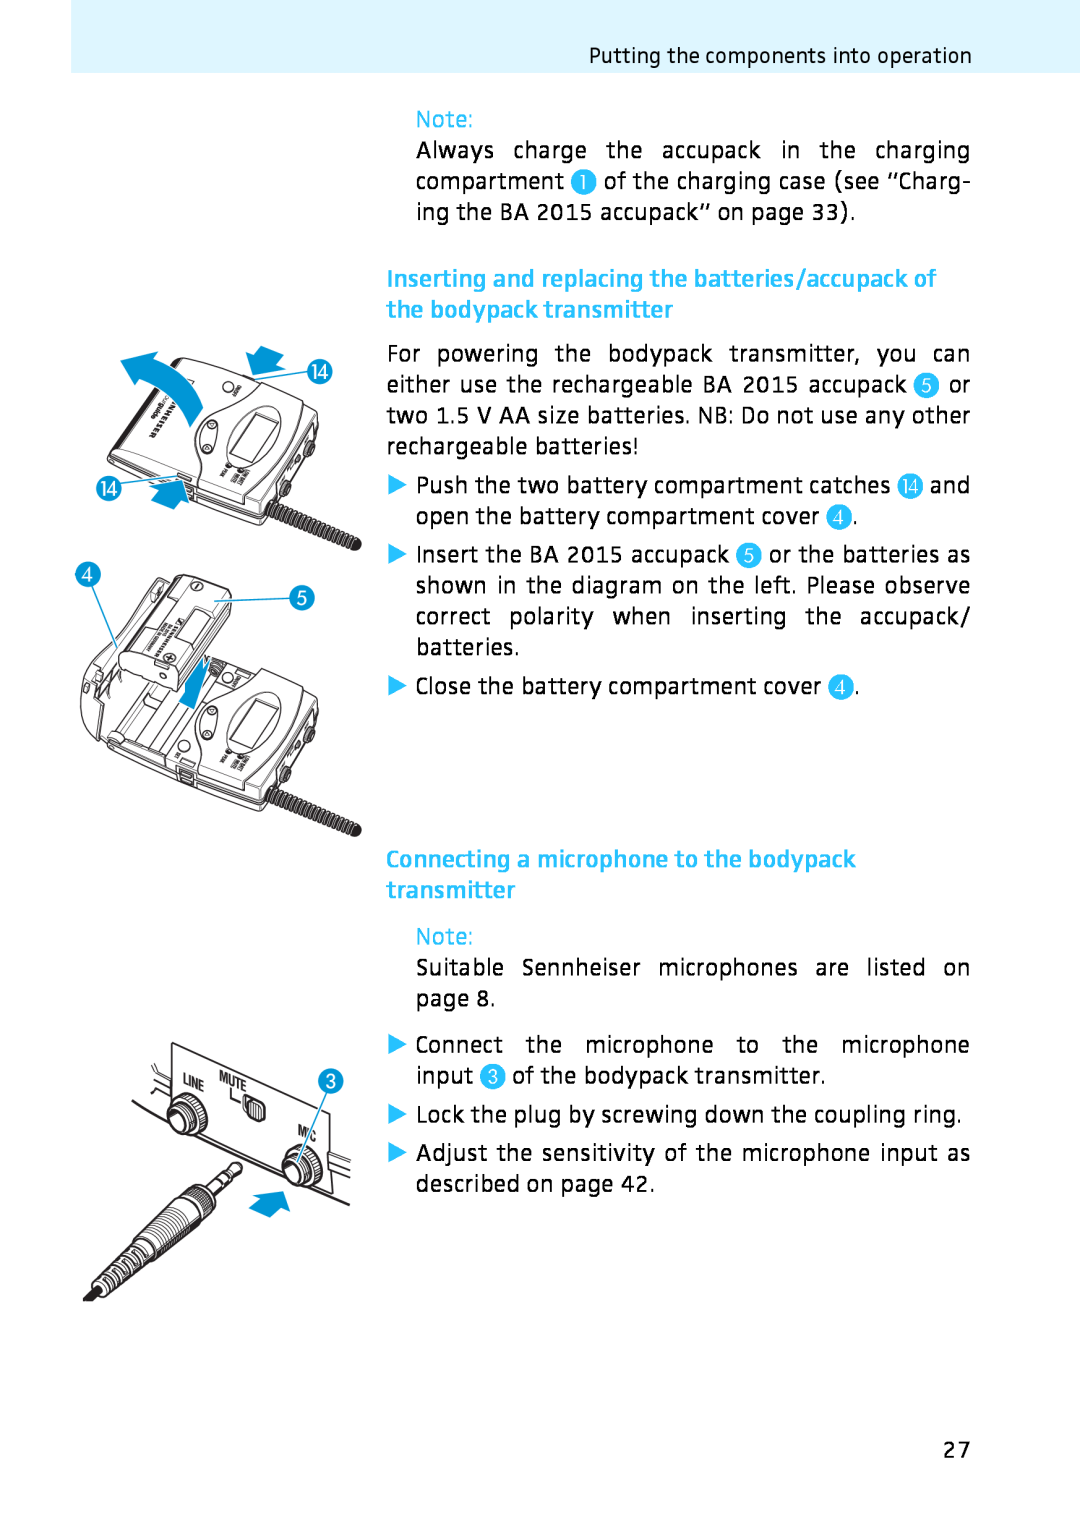 Sennheiser 2020 instruction manual Close the battery compartment cover 